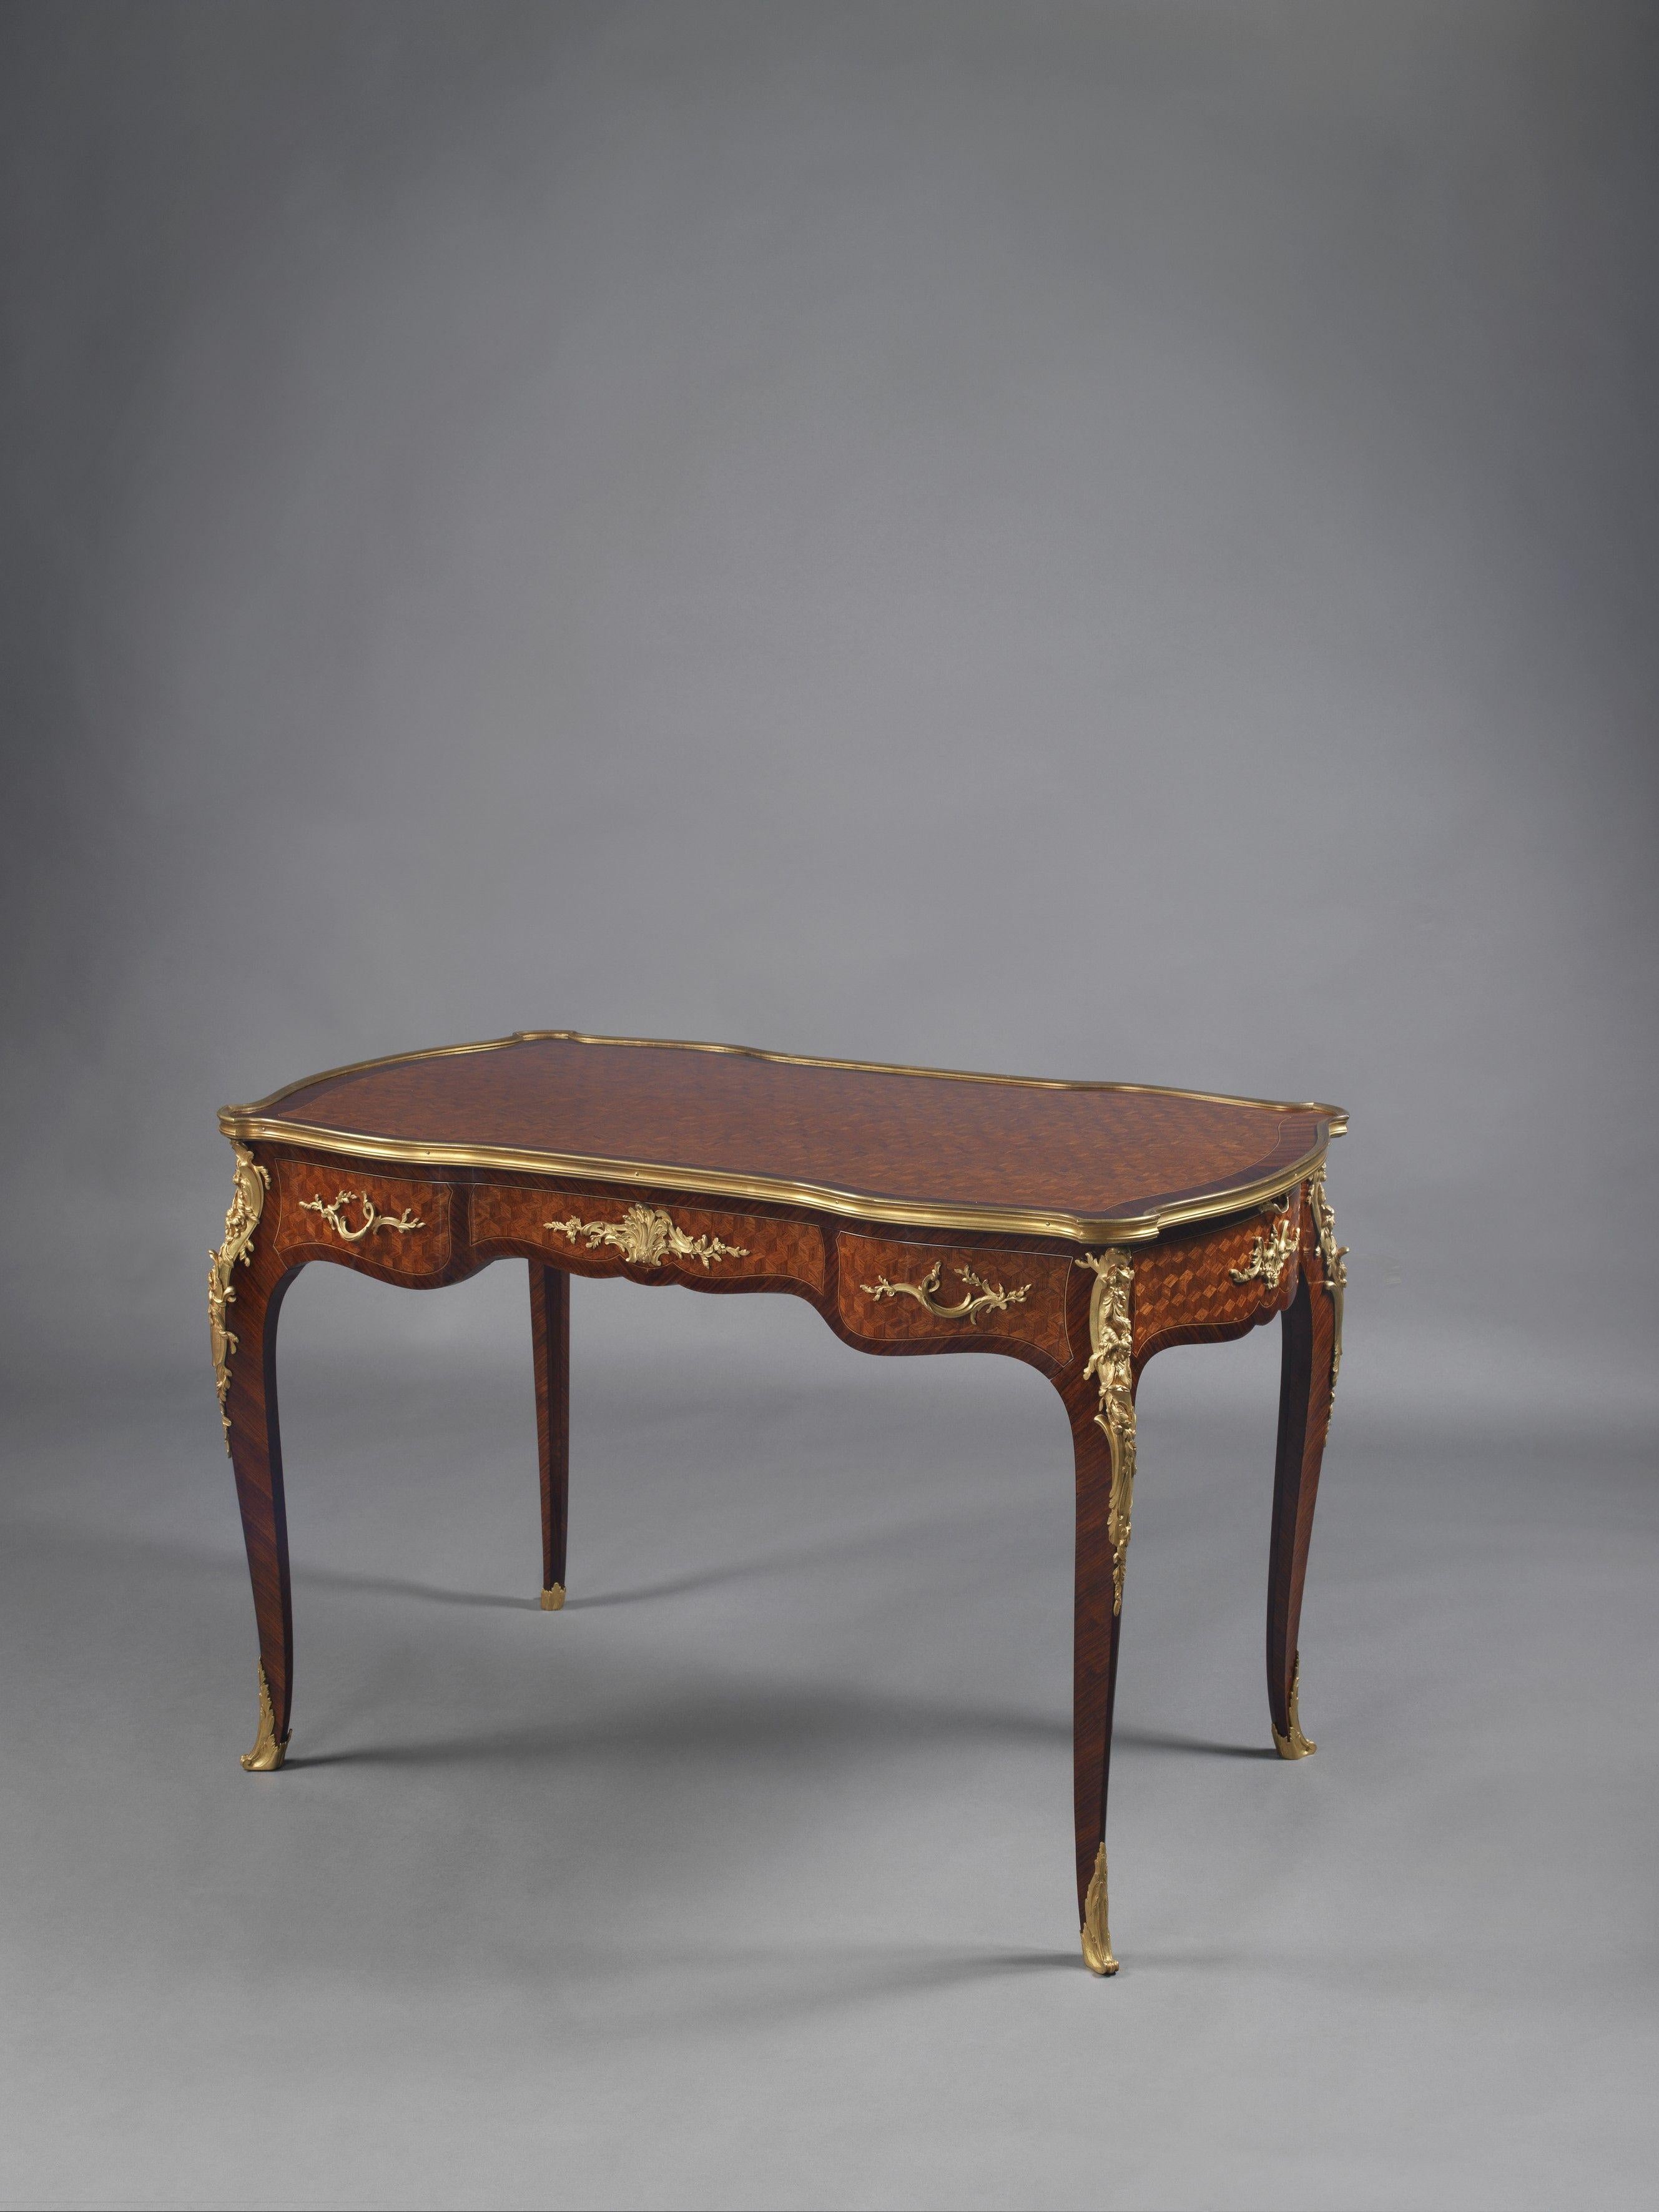 A Louis XV Style gilt bronze-mounted parquetry inlaid writing-table, by François Linke.

French, circa 1890.

Stamped 'FL' to the reverse of the centre bronze mounts to the front and back and to the handles. Stamped '2519 LINKE' to the reverse